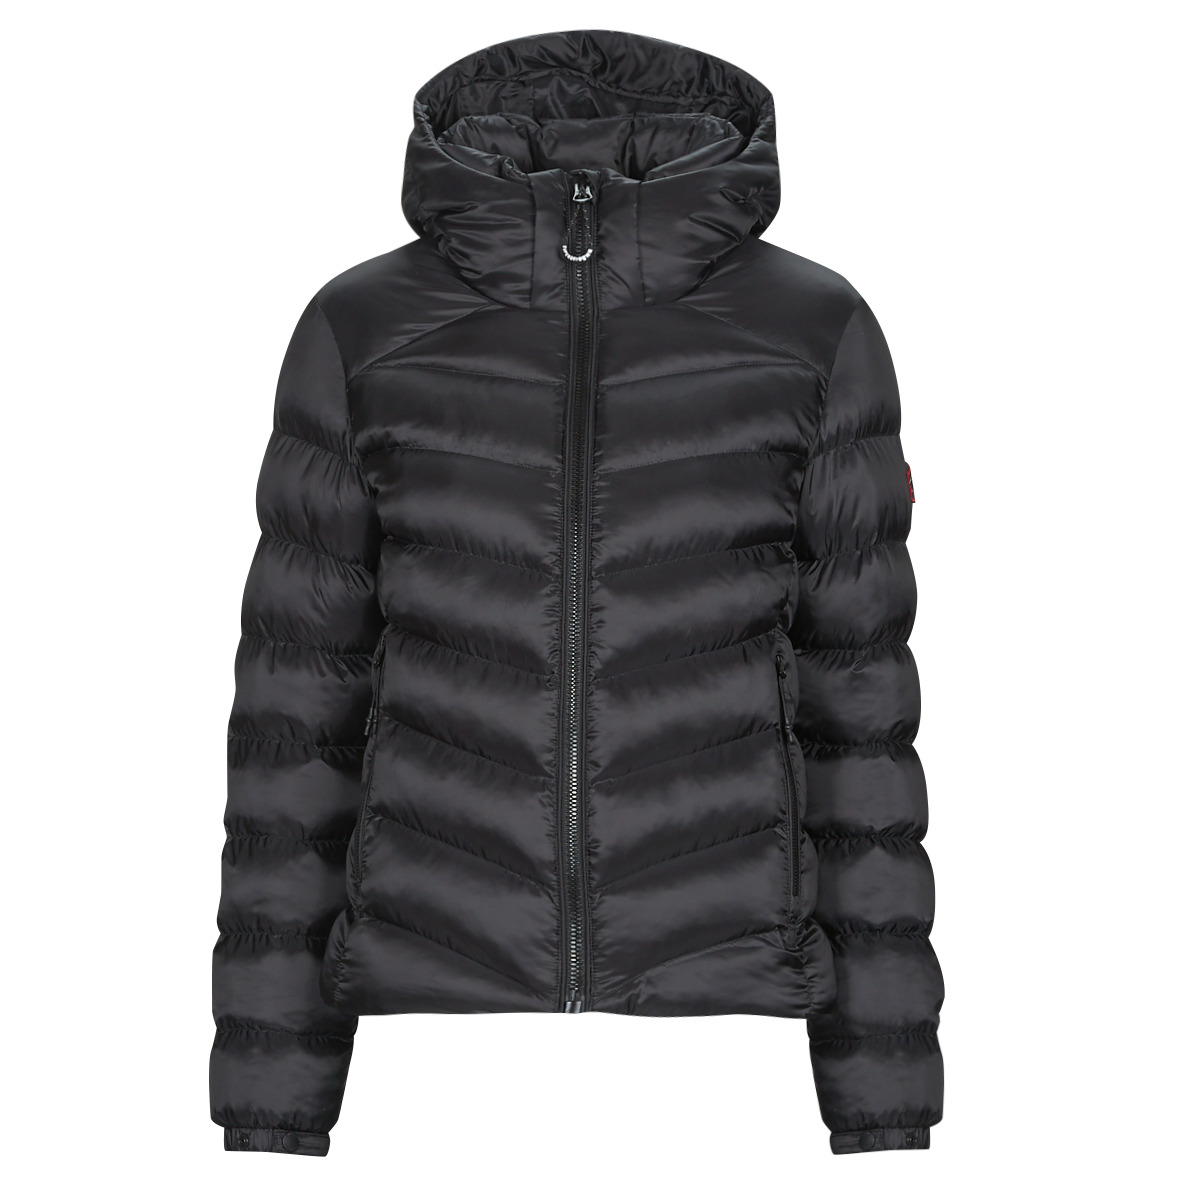 Superdry HOODED FUJI coats - JACKET - NET Free Black Women ! Duffel delivery | Clothing PADDED Spartoo